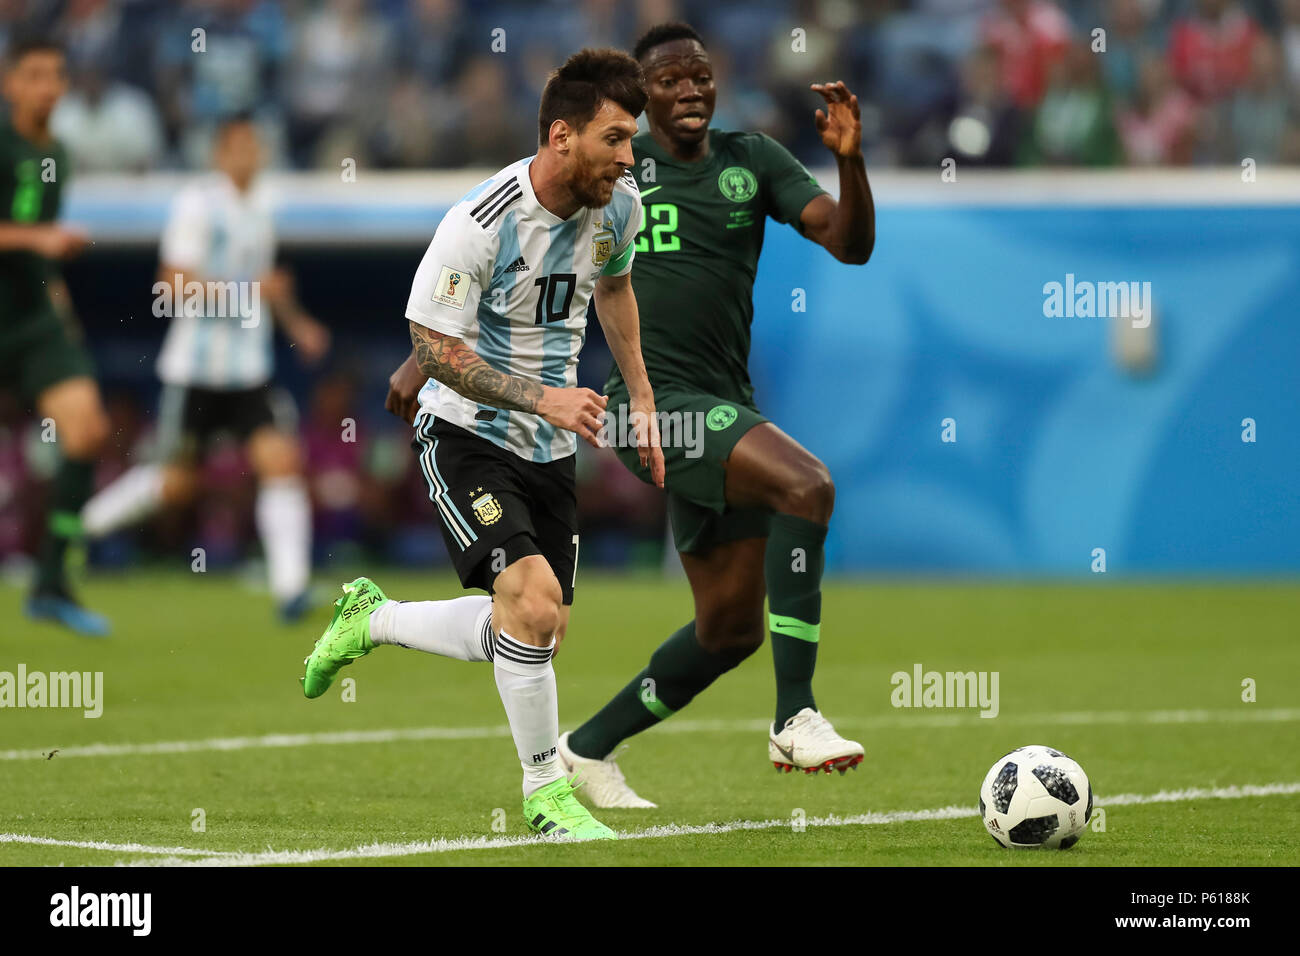 St Petersburg, Russia. 26th Jun, 2018. Lionel Messi of Argentina breaks through past Kenneth Omeruo of Nigeria to score his side's first goal to make the score 1-0 during the 2018 FIFA World Cup Group D match between Nigeria and Argentina at Saint Petersburg Stadium on June 26th 2018 in Saint Petersburg, Russia. (Photo by Daniel Chesterton/phcimages.com) Credit: PHC Images/Alamy Live News Stock Photo